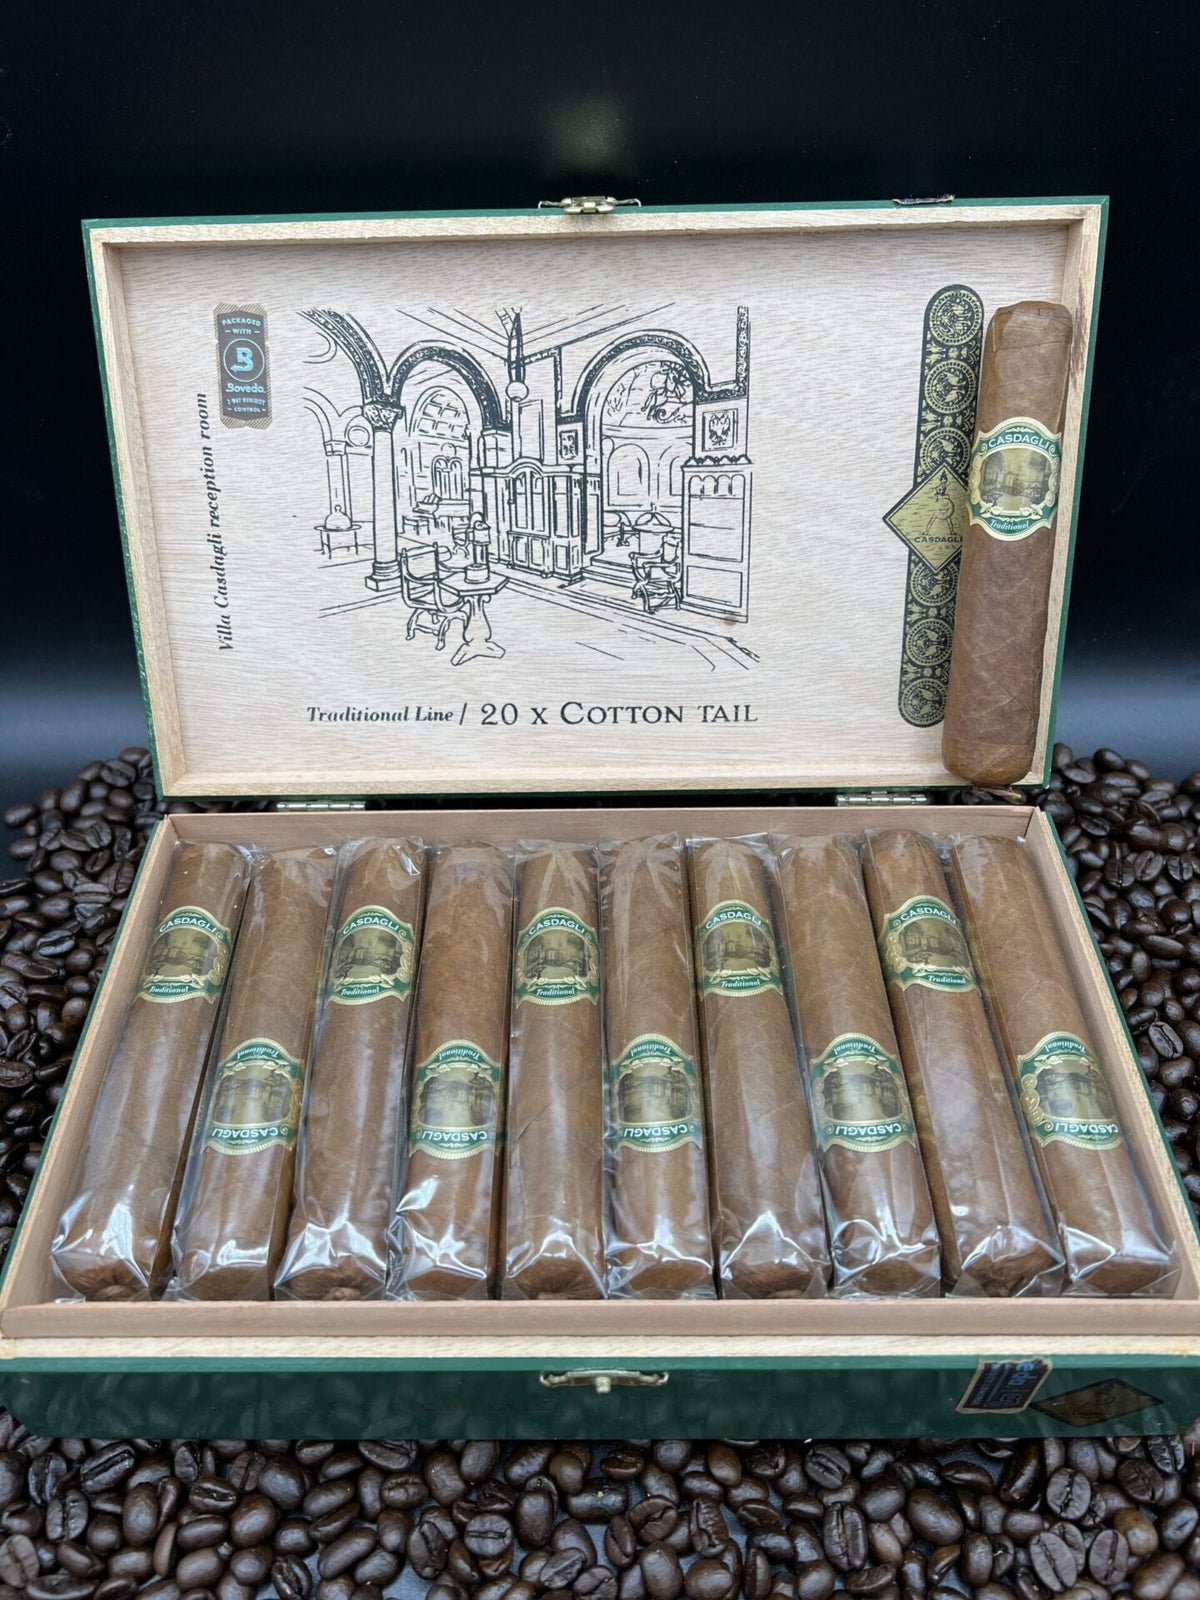 Casdagli Cotton Tail cigars supplied by Sir Louis Cigars